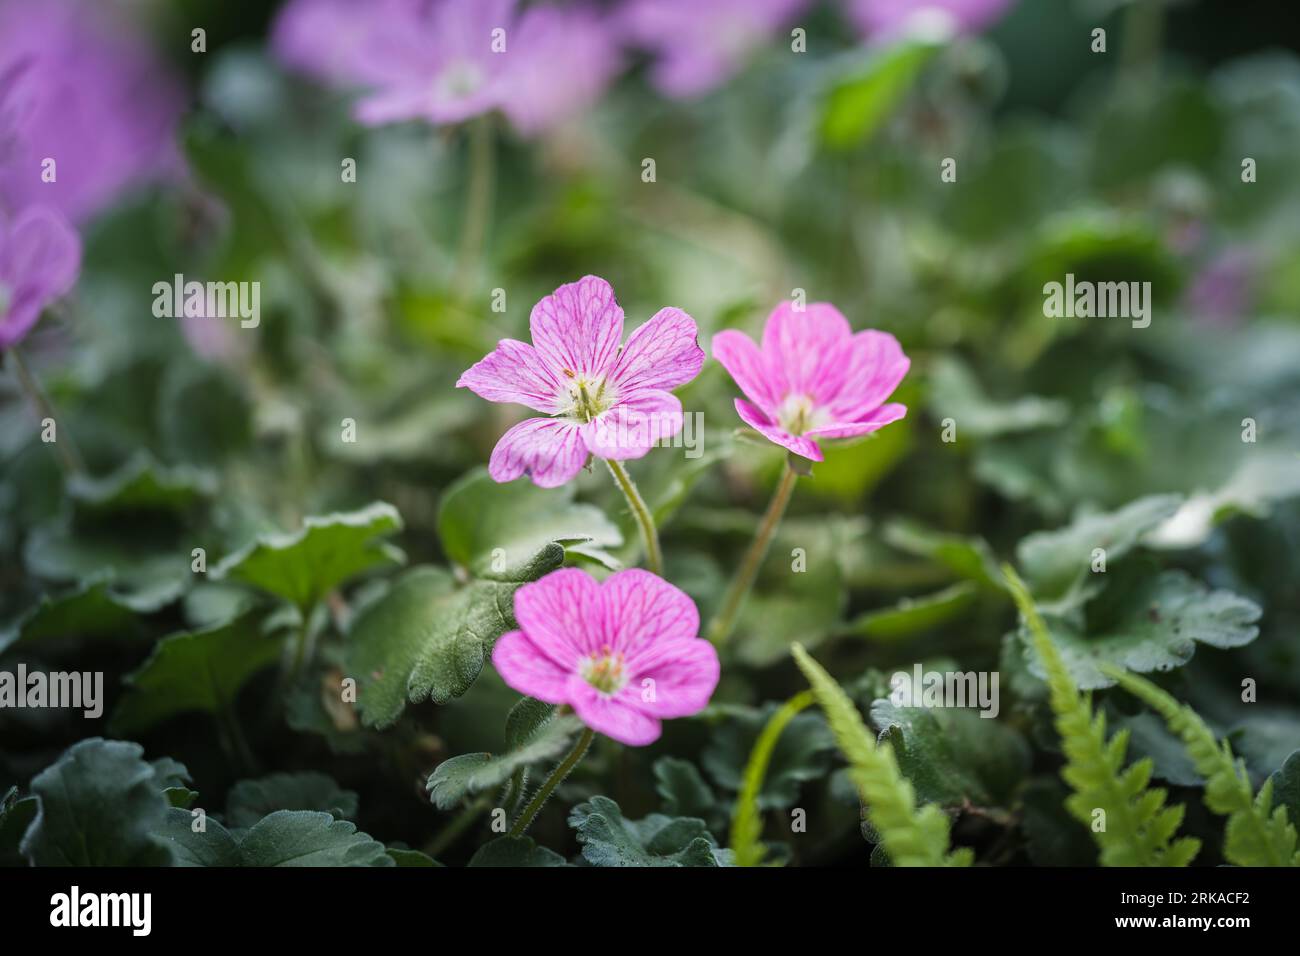 Beautiful macro of the small pink flowers of the Erodium plant. Erodium is a genus of flowering plants in the botanical family Geraniaceae, this is th Stock Photo